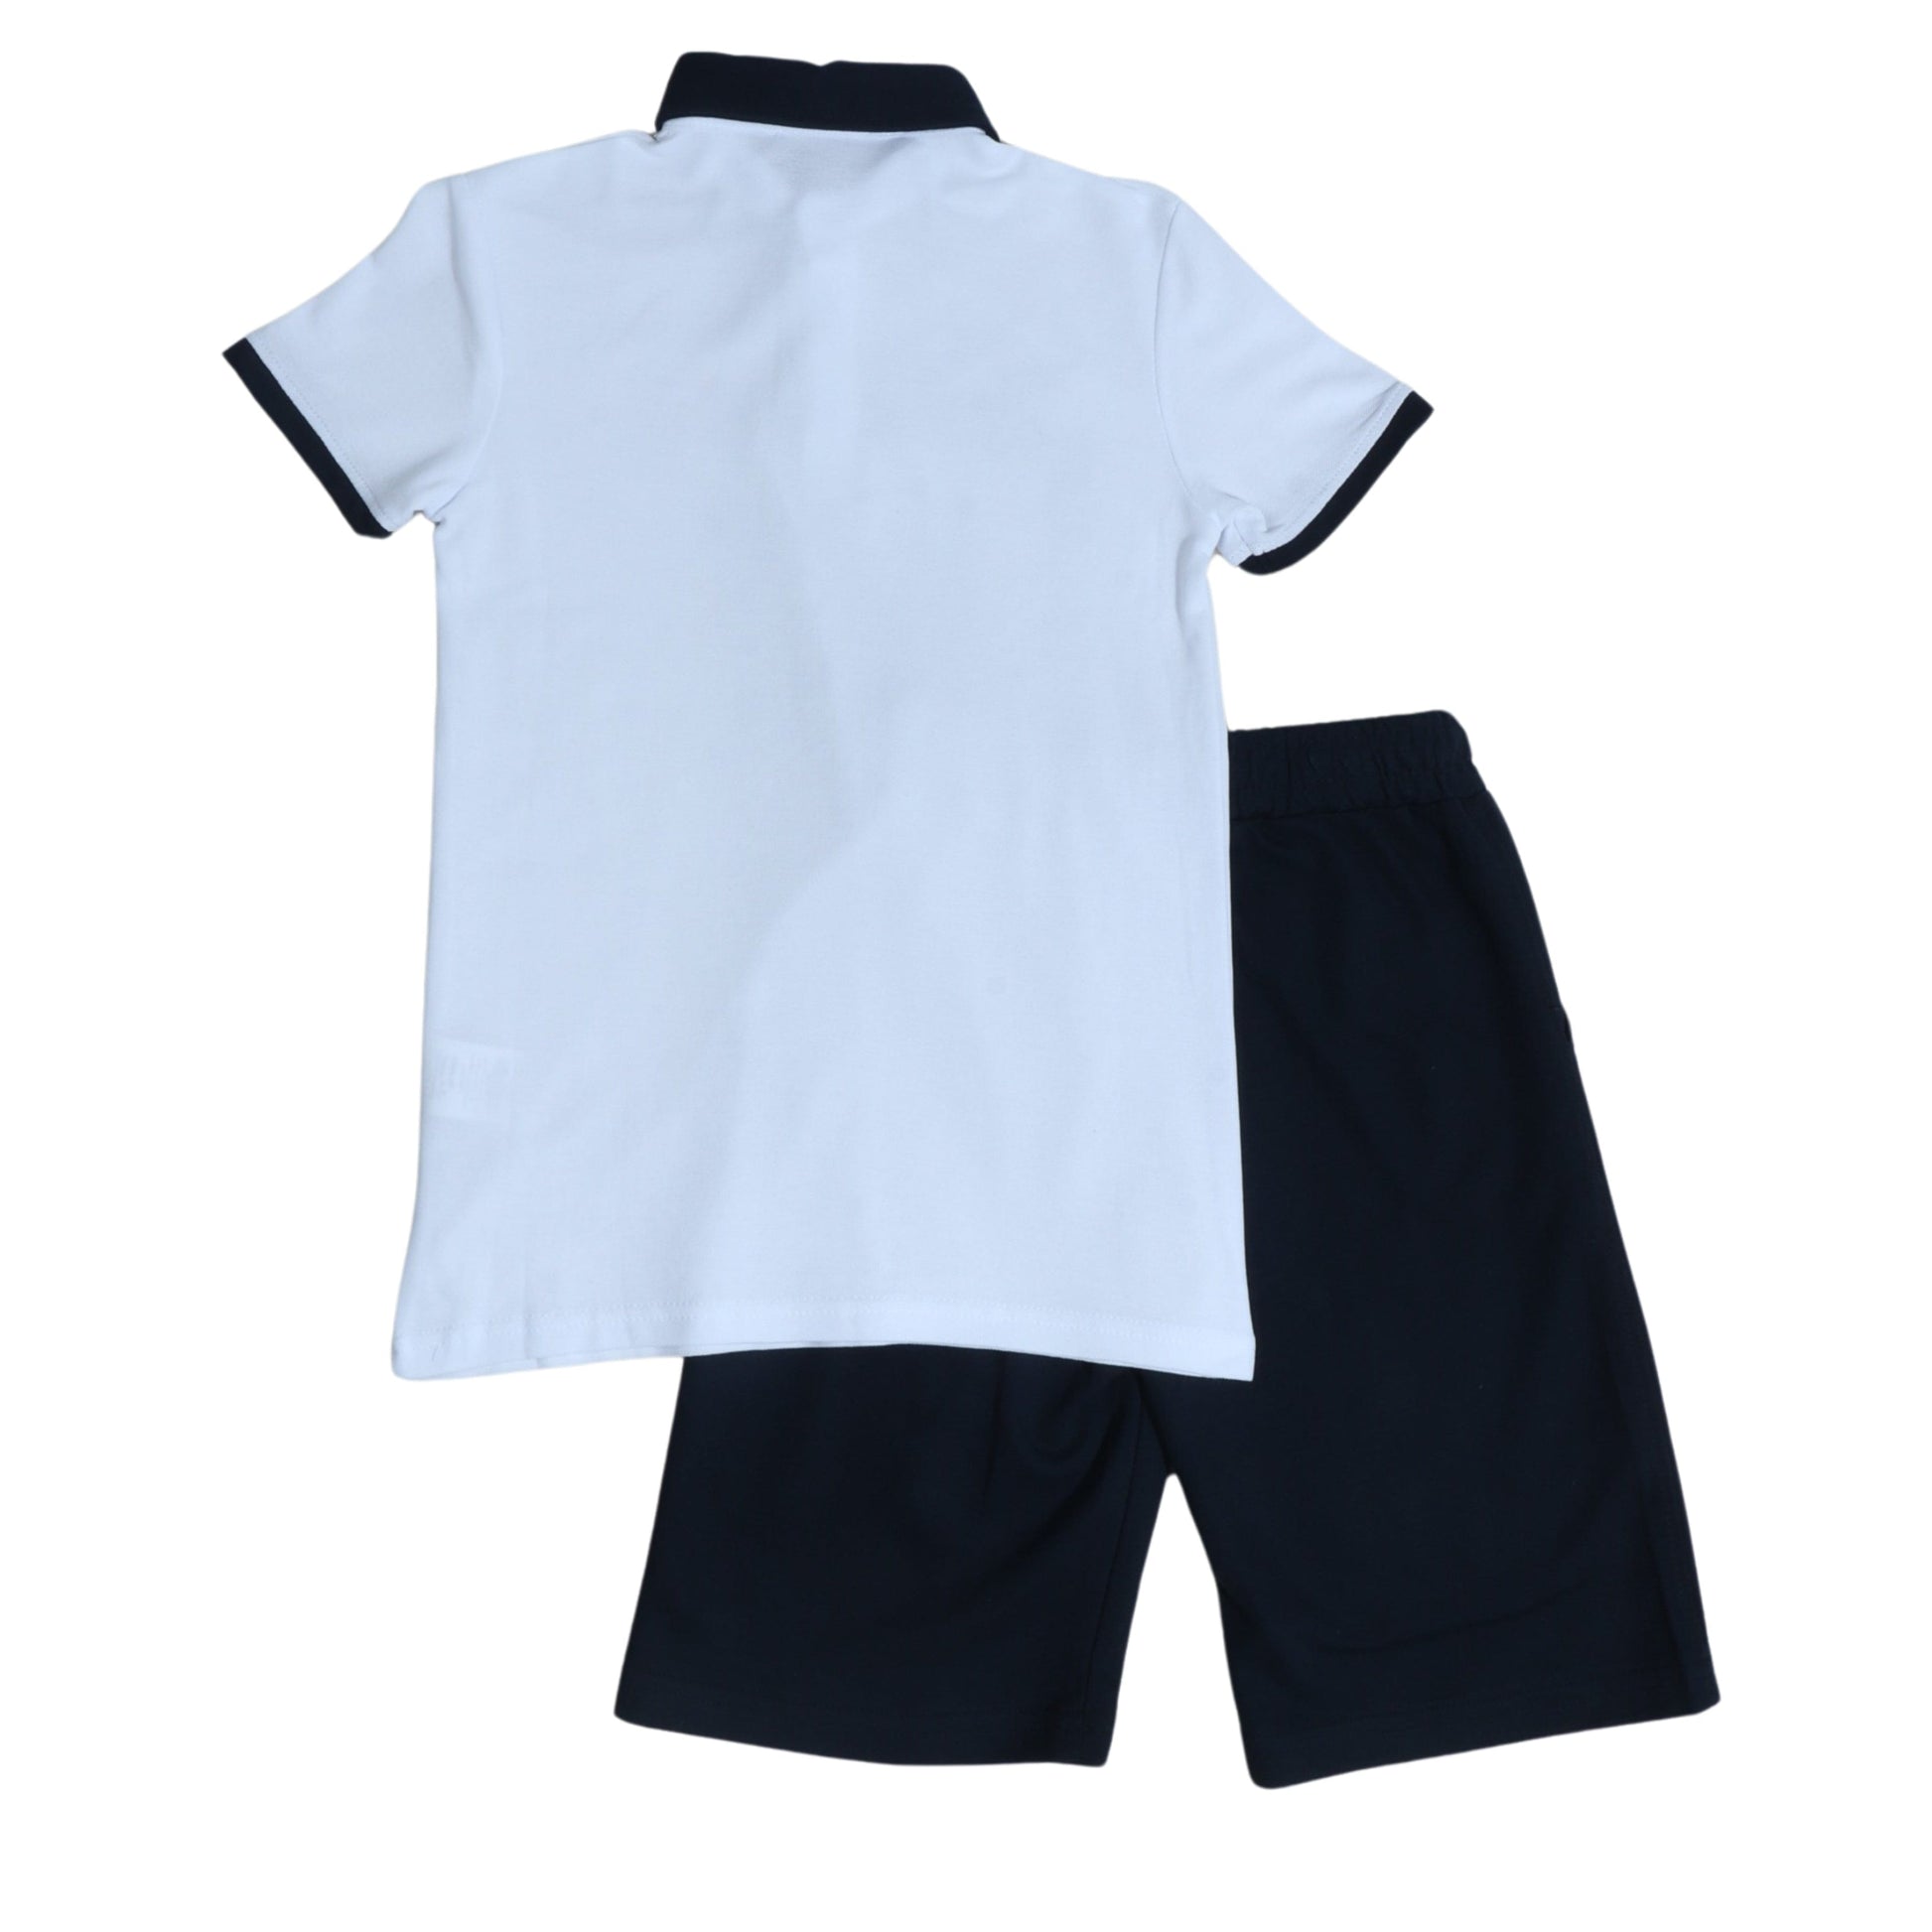 TOMMY LIFE Boys Set S / White TOMMY LIFE - Printed Polo Neck Set